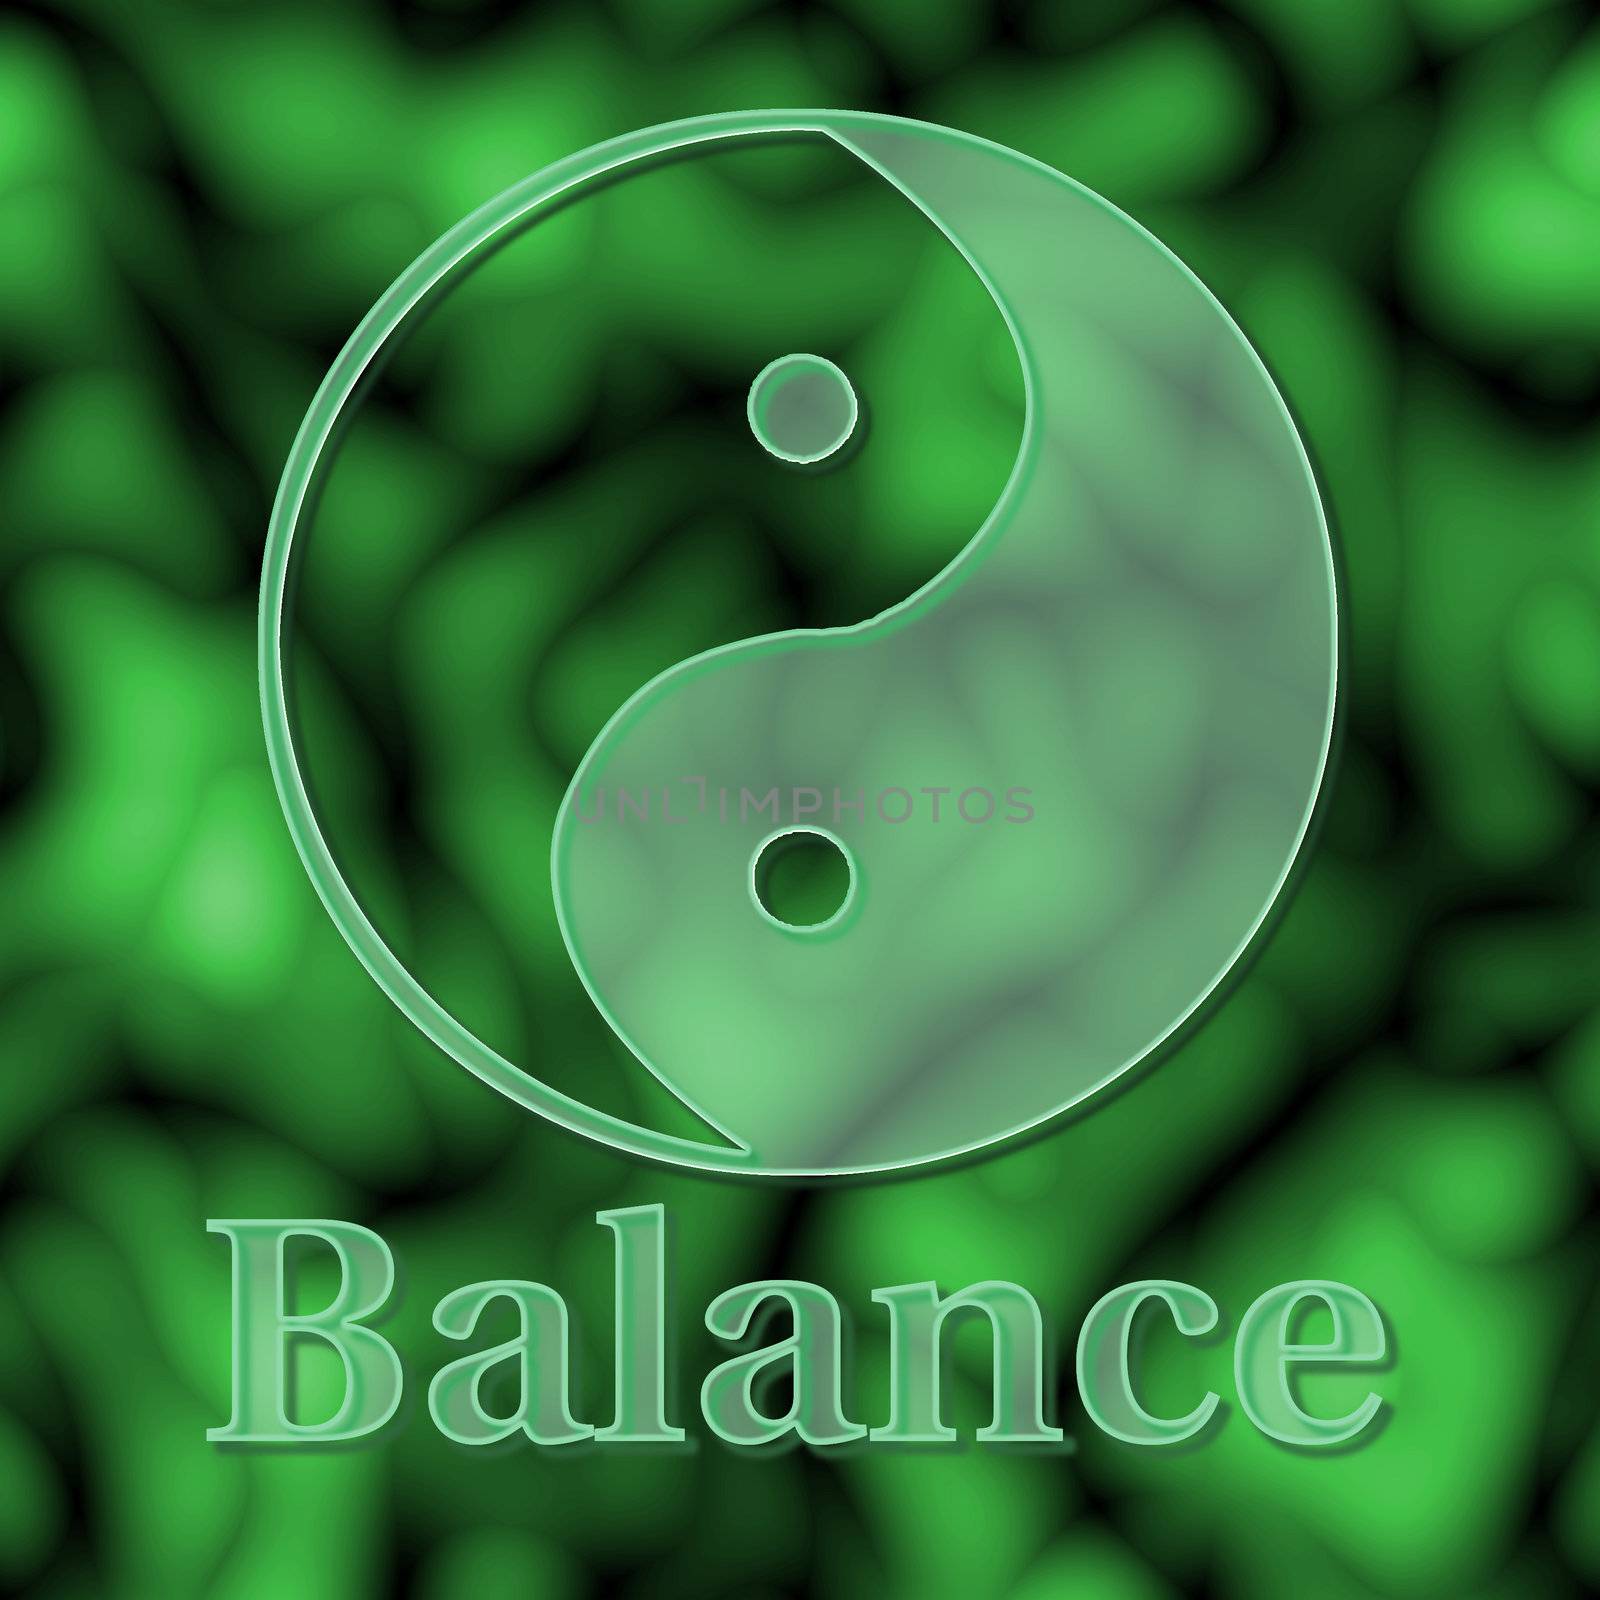 Balance illustrated with a glass yin yang symbol on green - raster illustration.